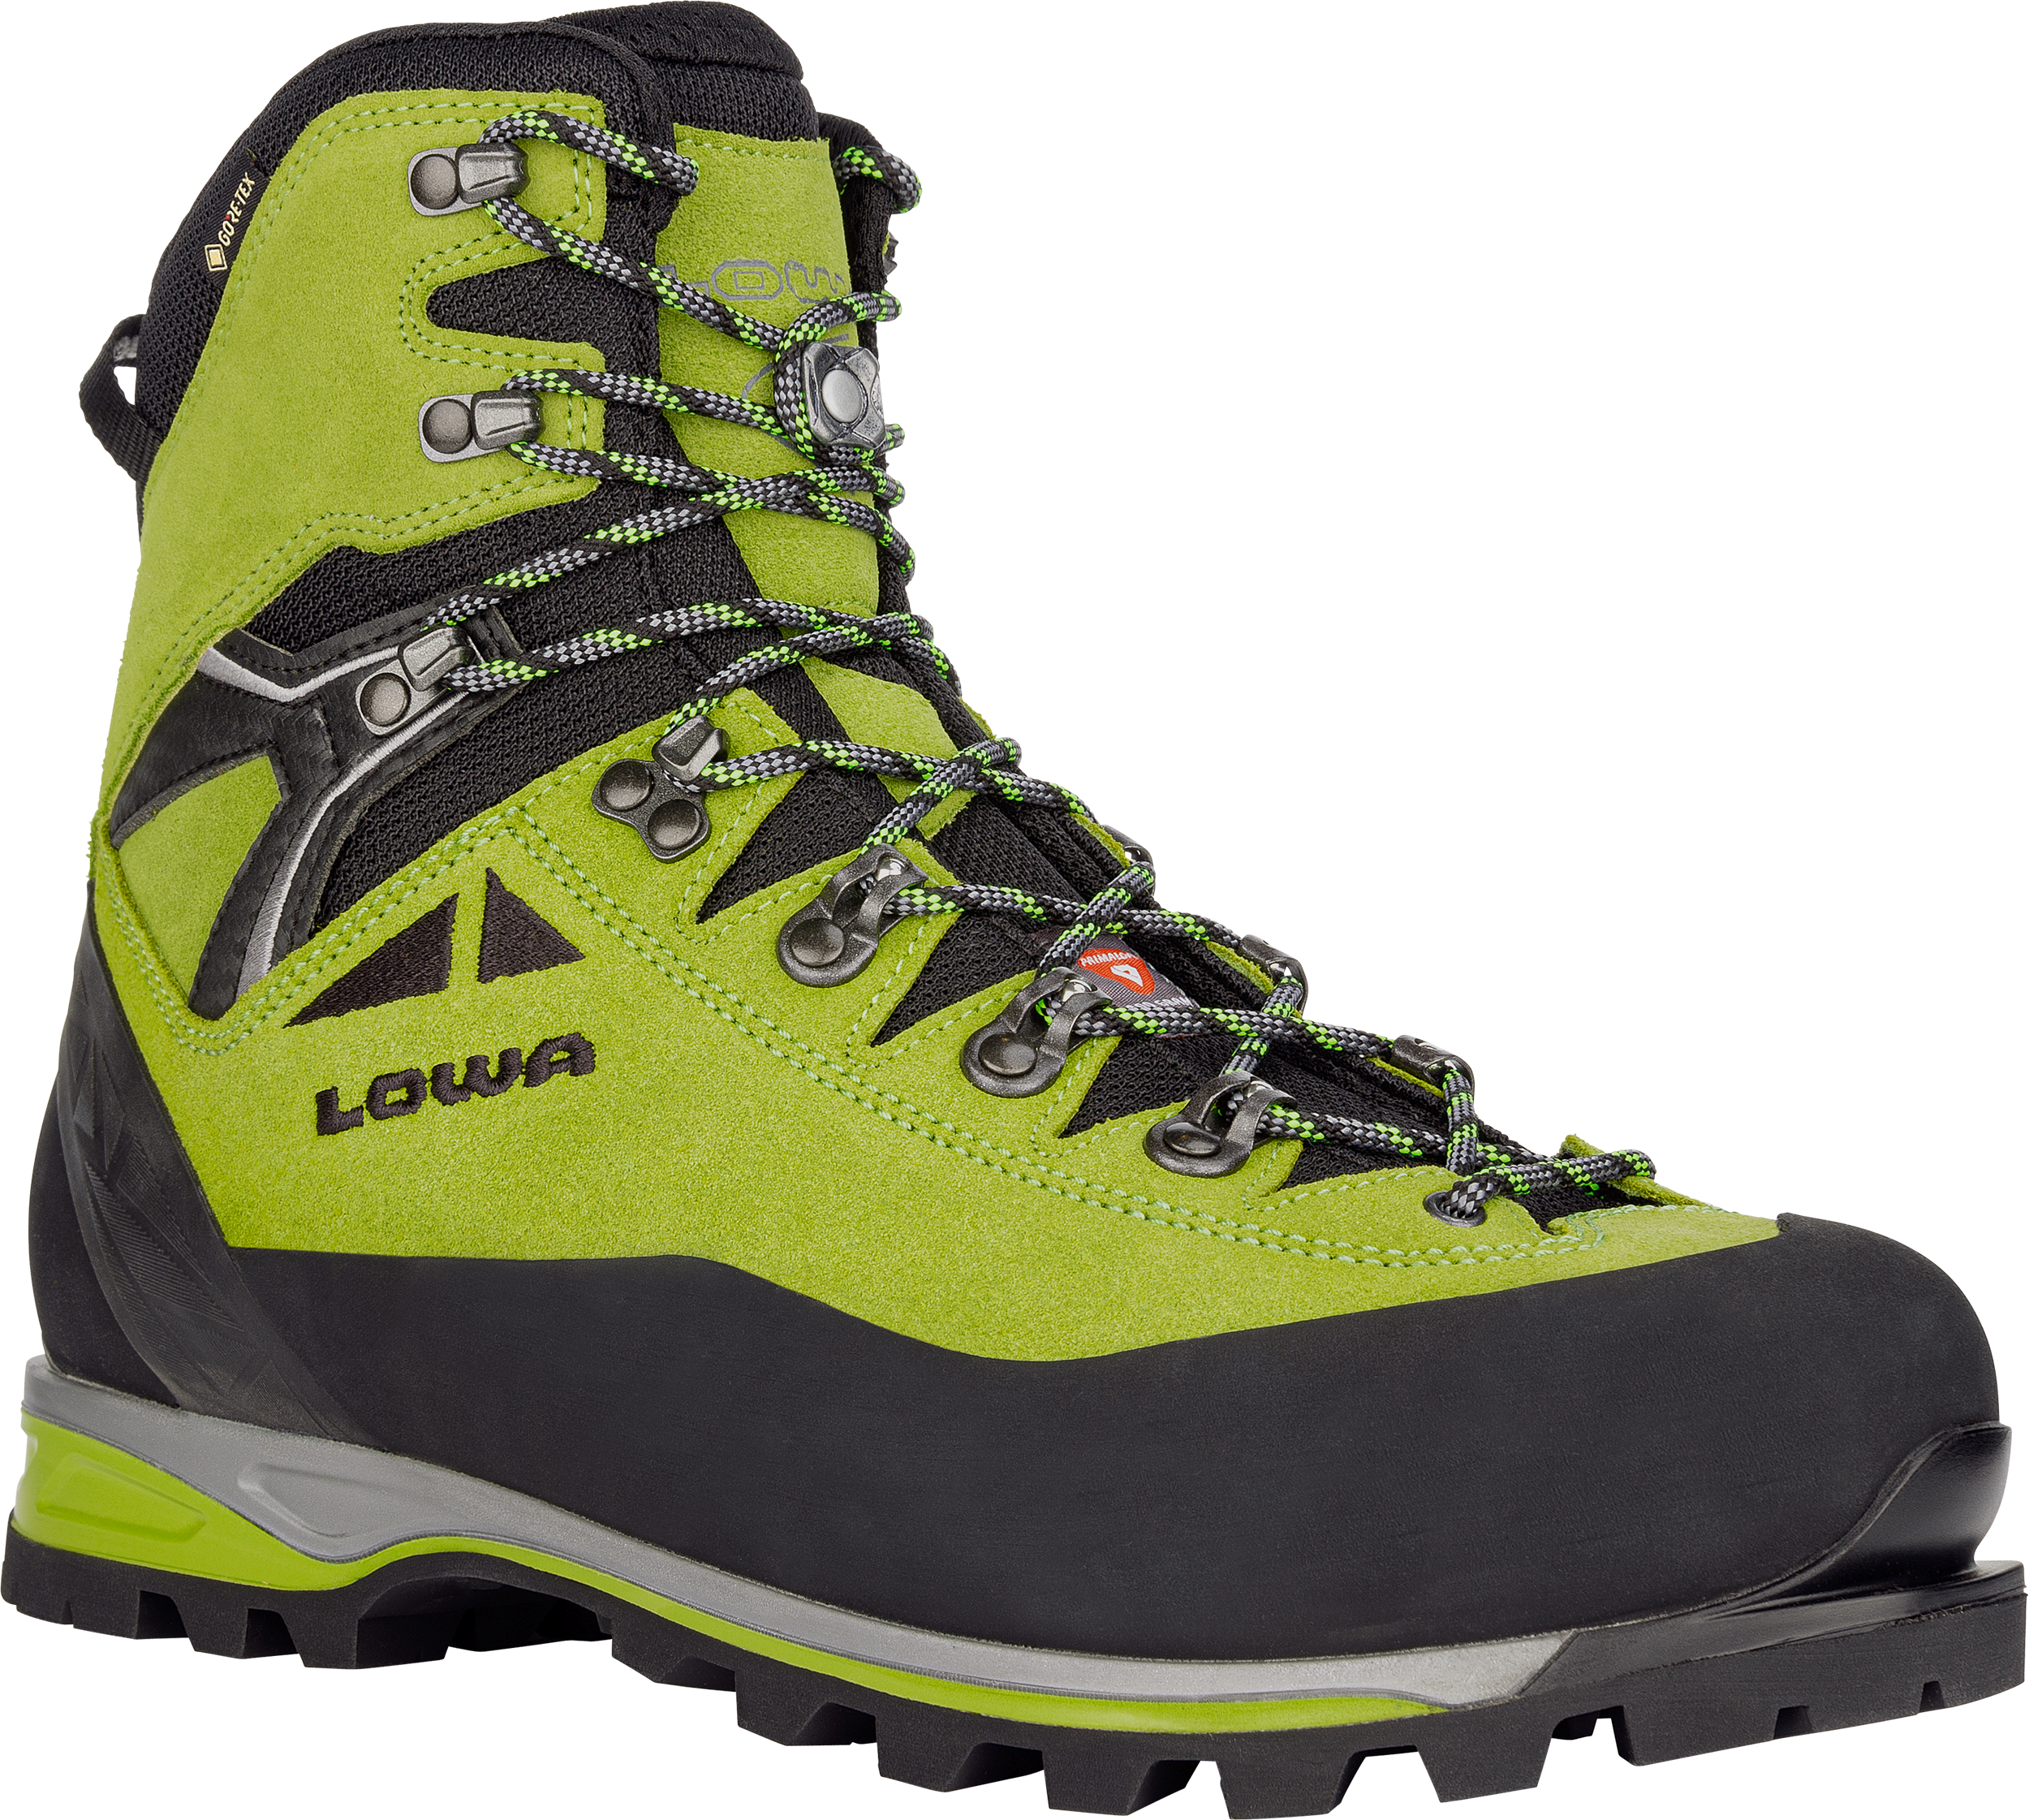 Madeliefje Malaise holte ALPINE EXPERT II GTX: MOUNTAINEERING shoes for men. | LOWA INT